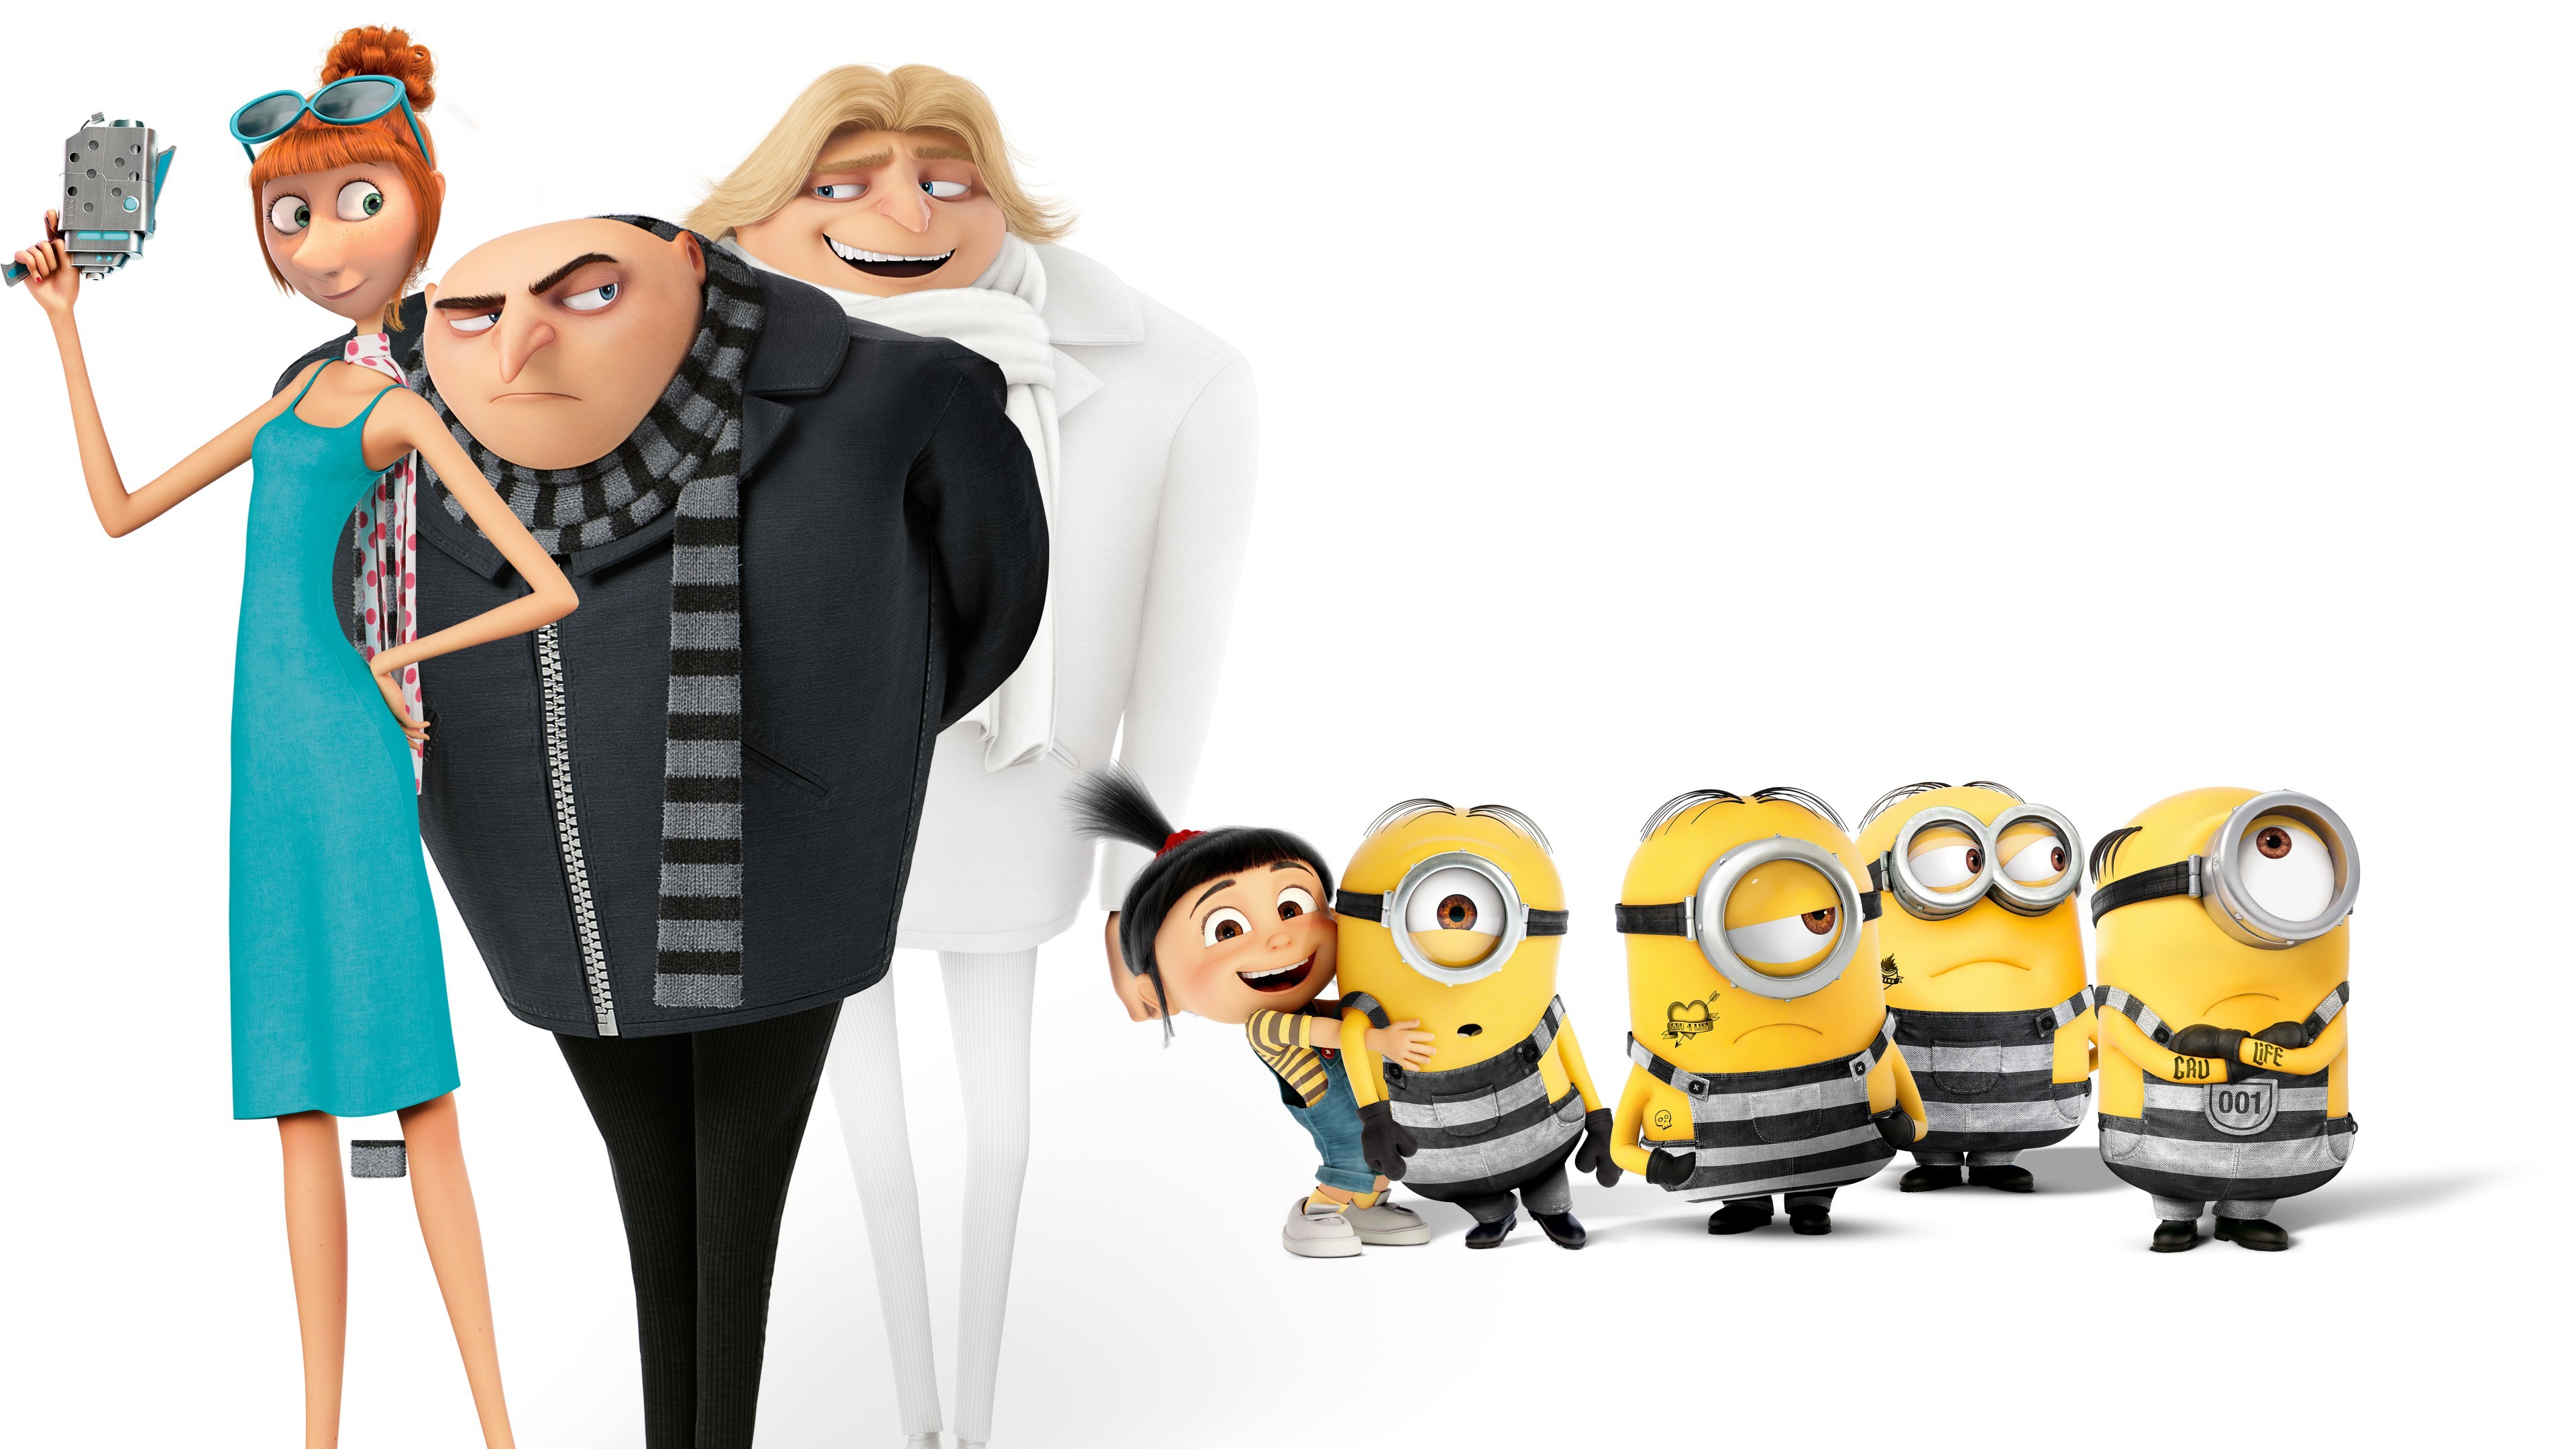 3840x2160 Tags: Despicable Me ...